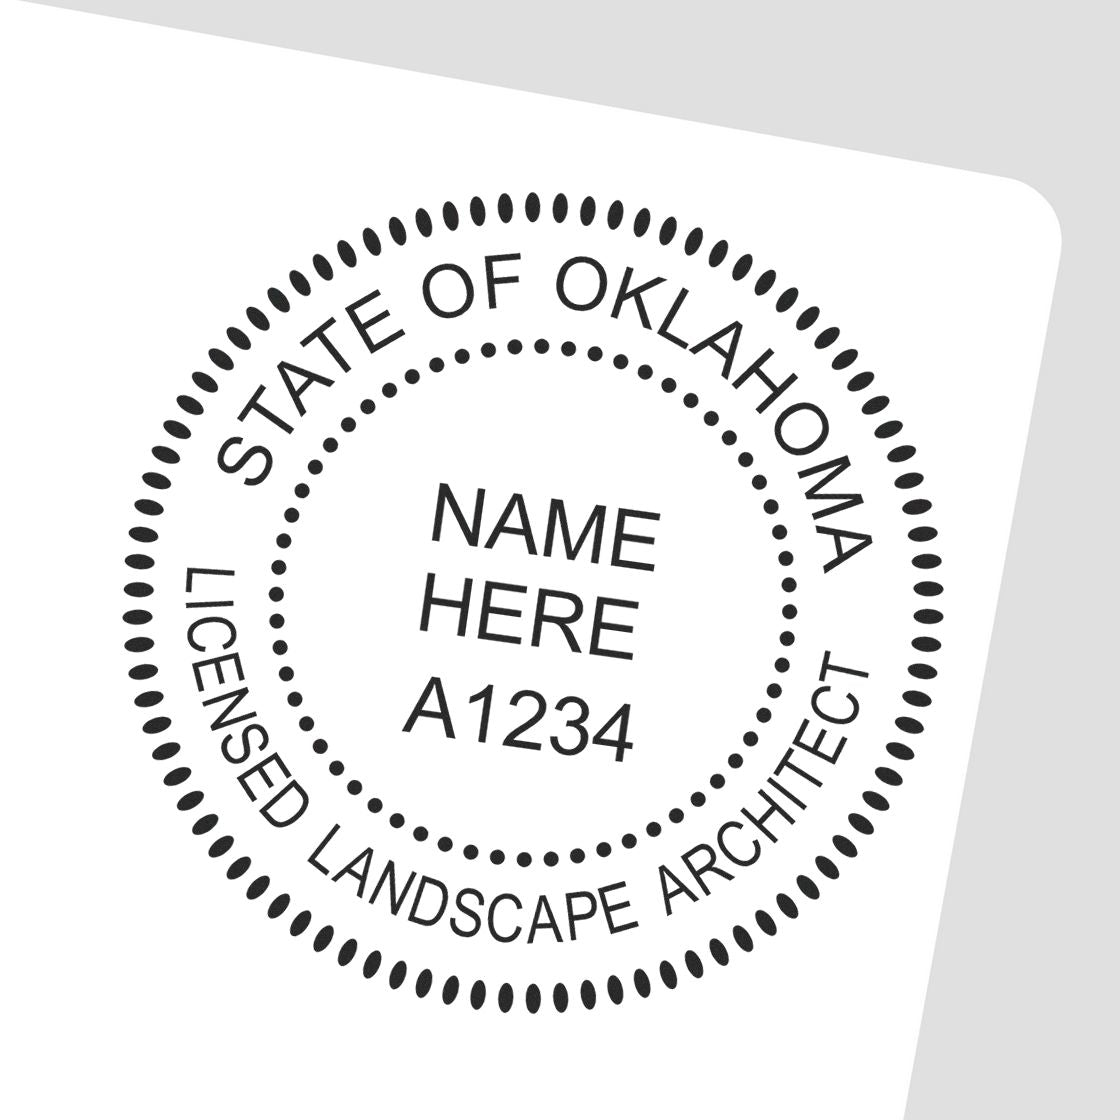 A lifestyle photo showing a stamped image of the Digital Oklahoma Landscape Architect Stamp on a piece of paper